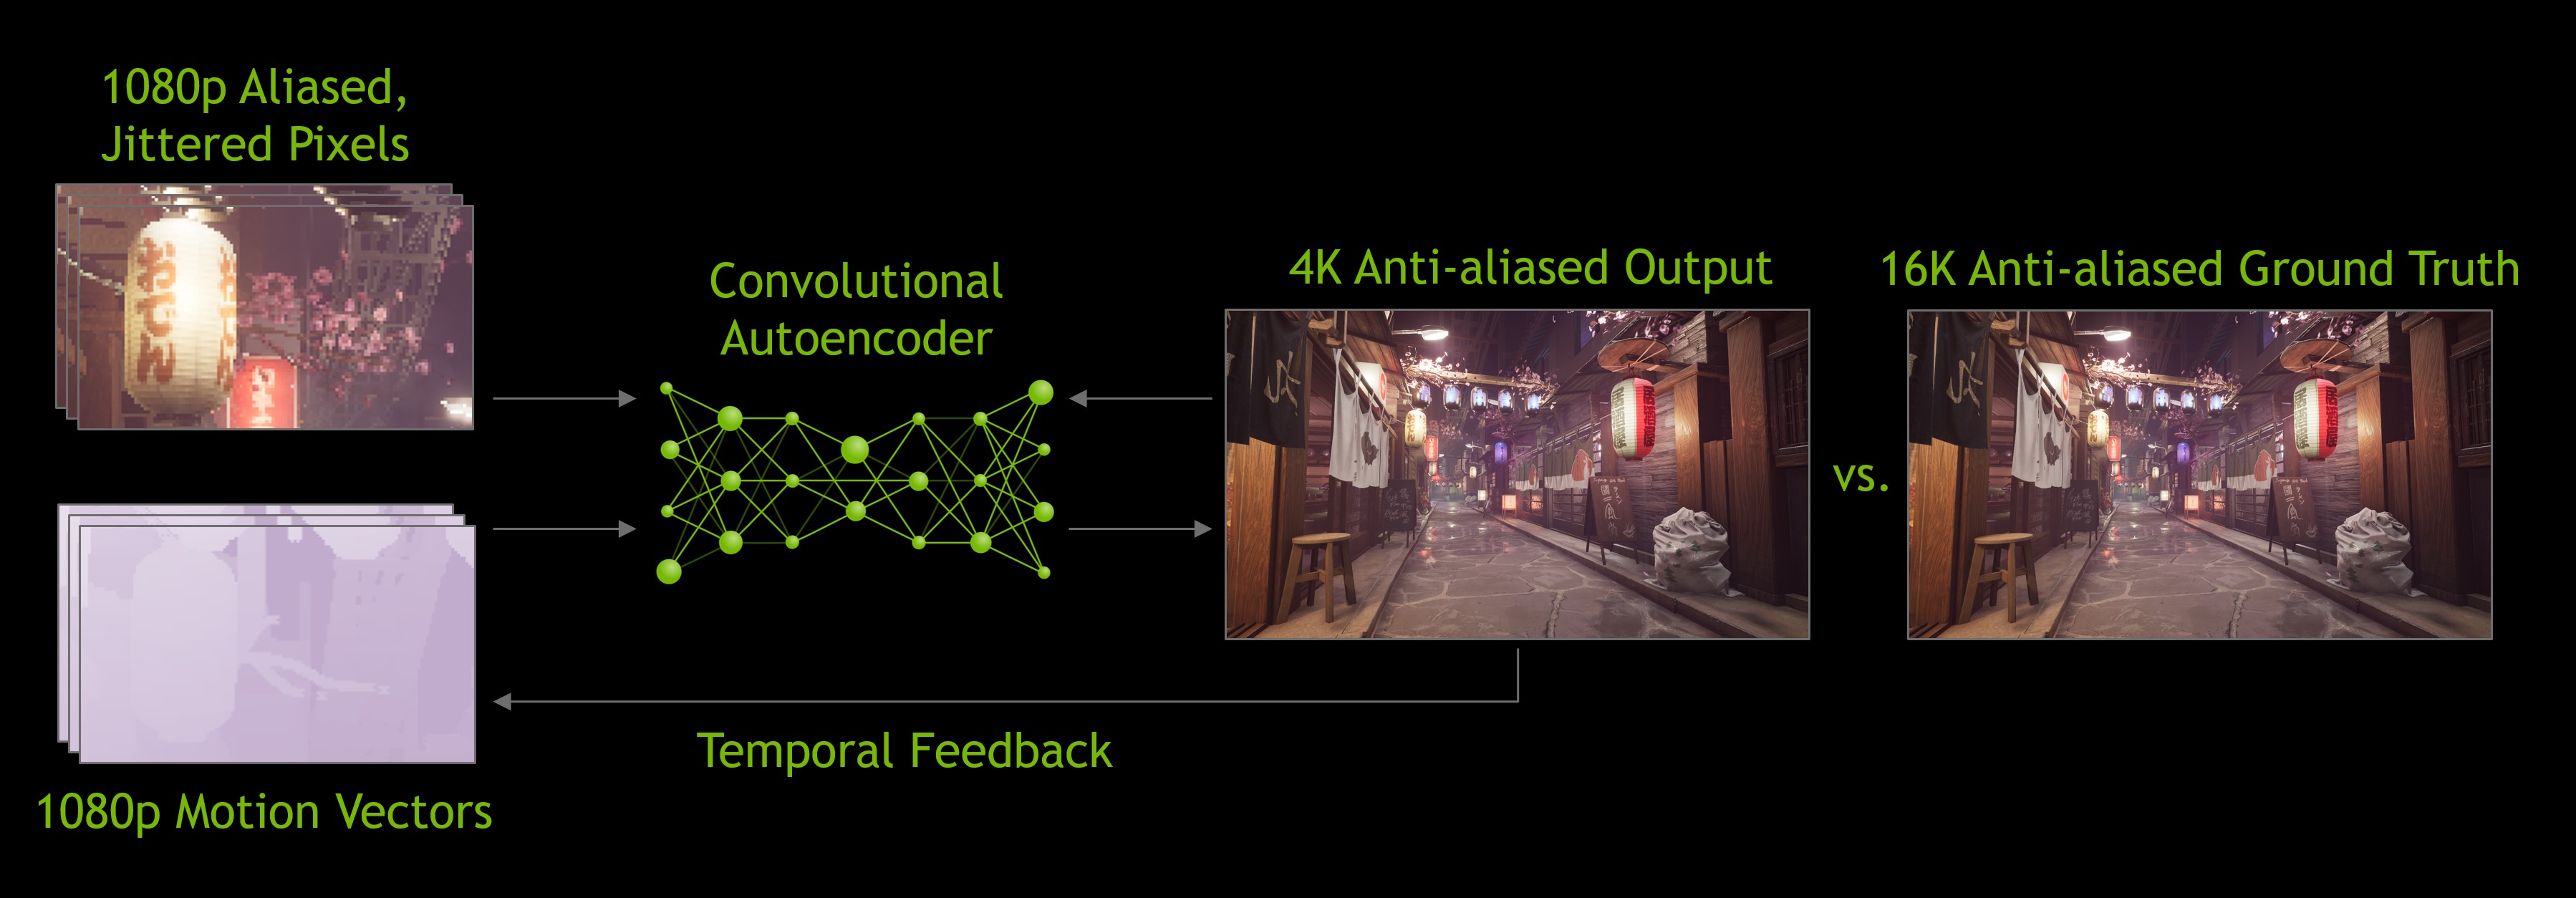 nvidia-dlss-2-0-architecture-temporal-feedback.jpg